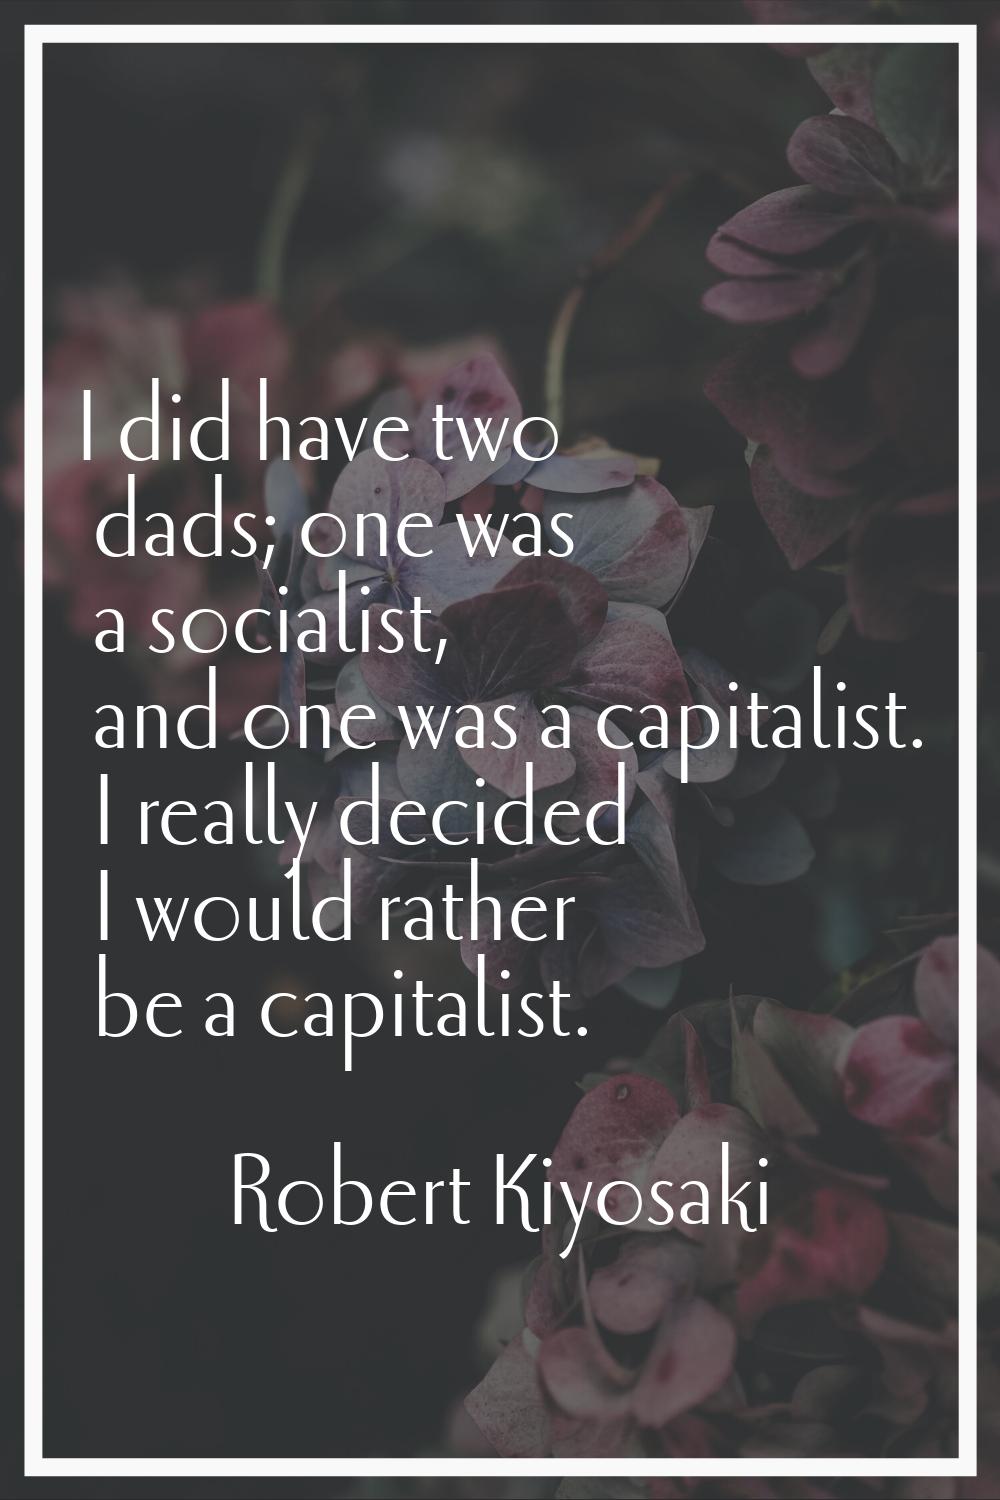 I did have two dads; one was a socialist, and one was a capitalist. I really decided I would rather